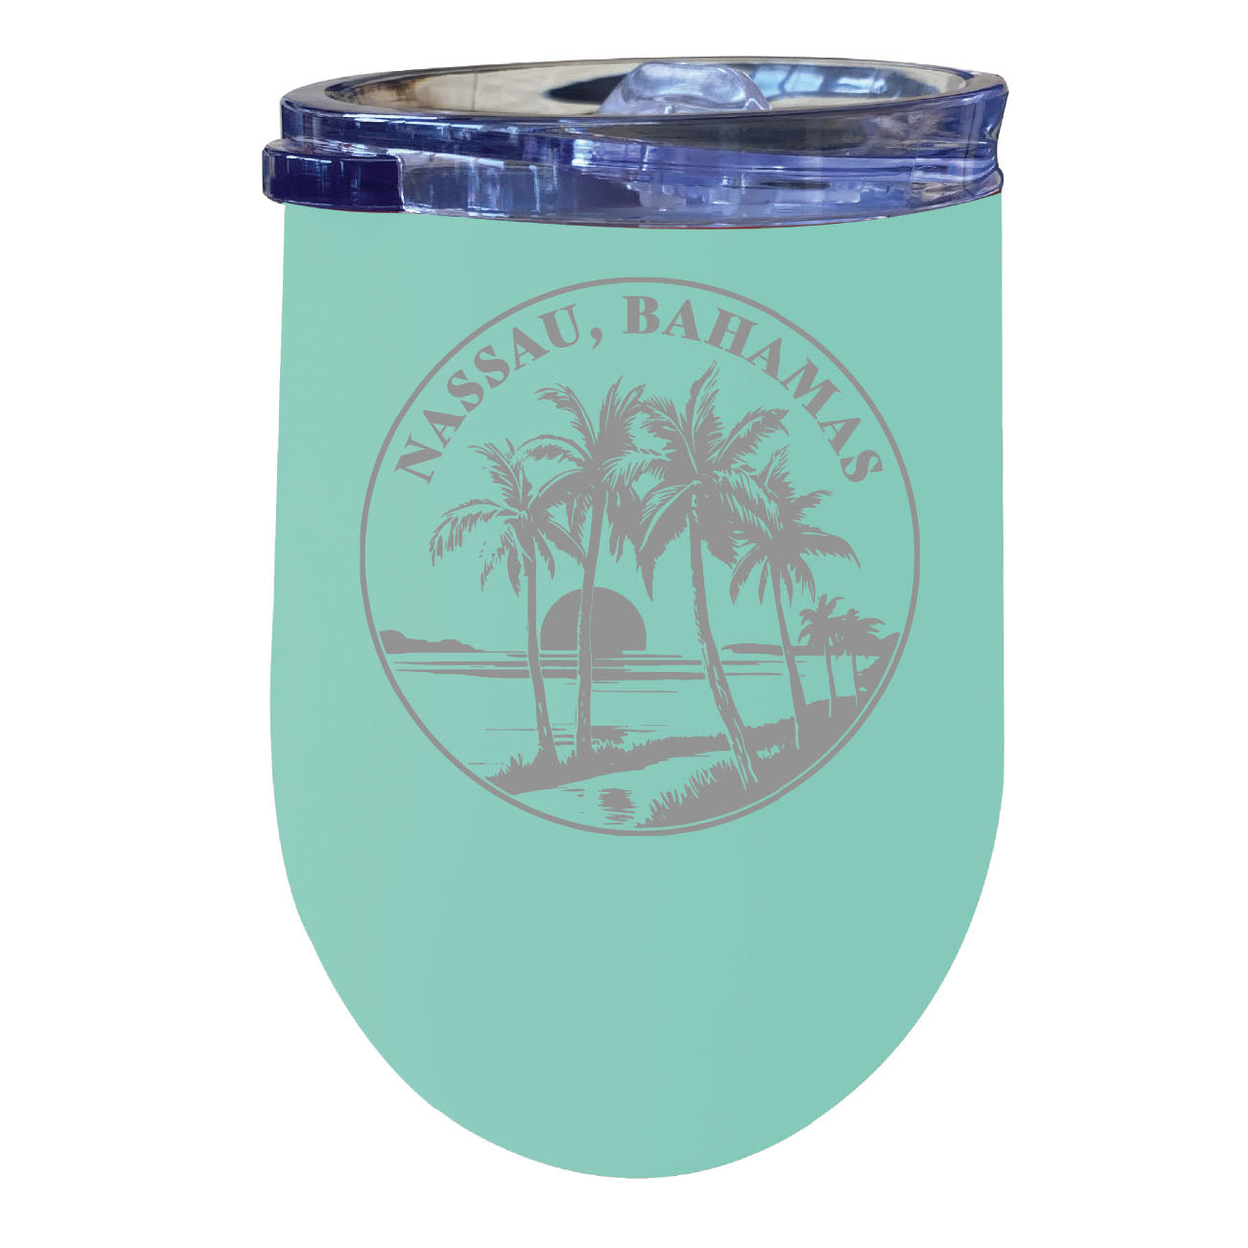 Nassau The Bahamas Souvenir 12 Oz Engraved Insulated Wine Stainless Steel Tumbler - Seafoam,,2-Pack